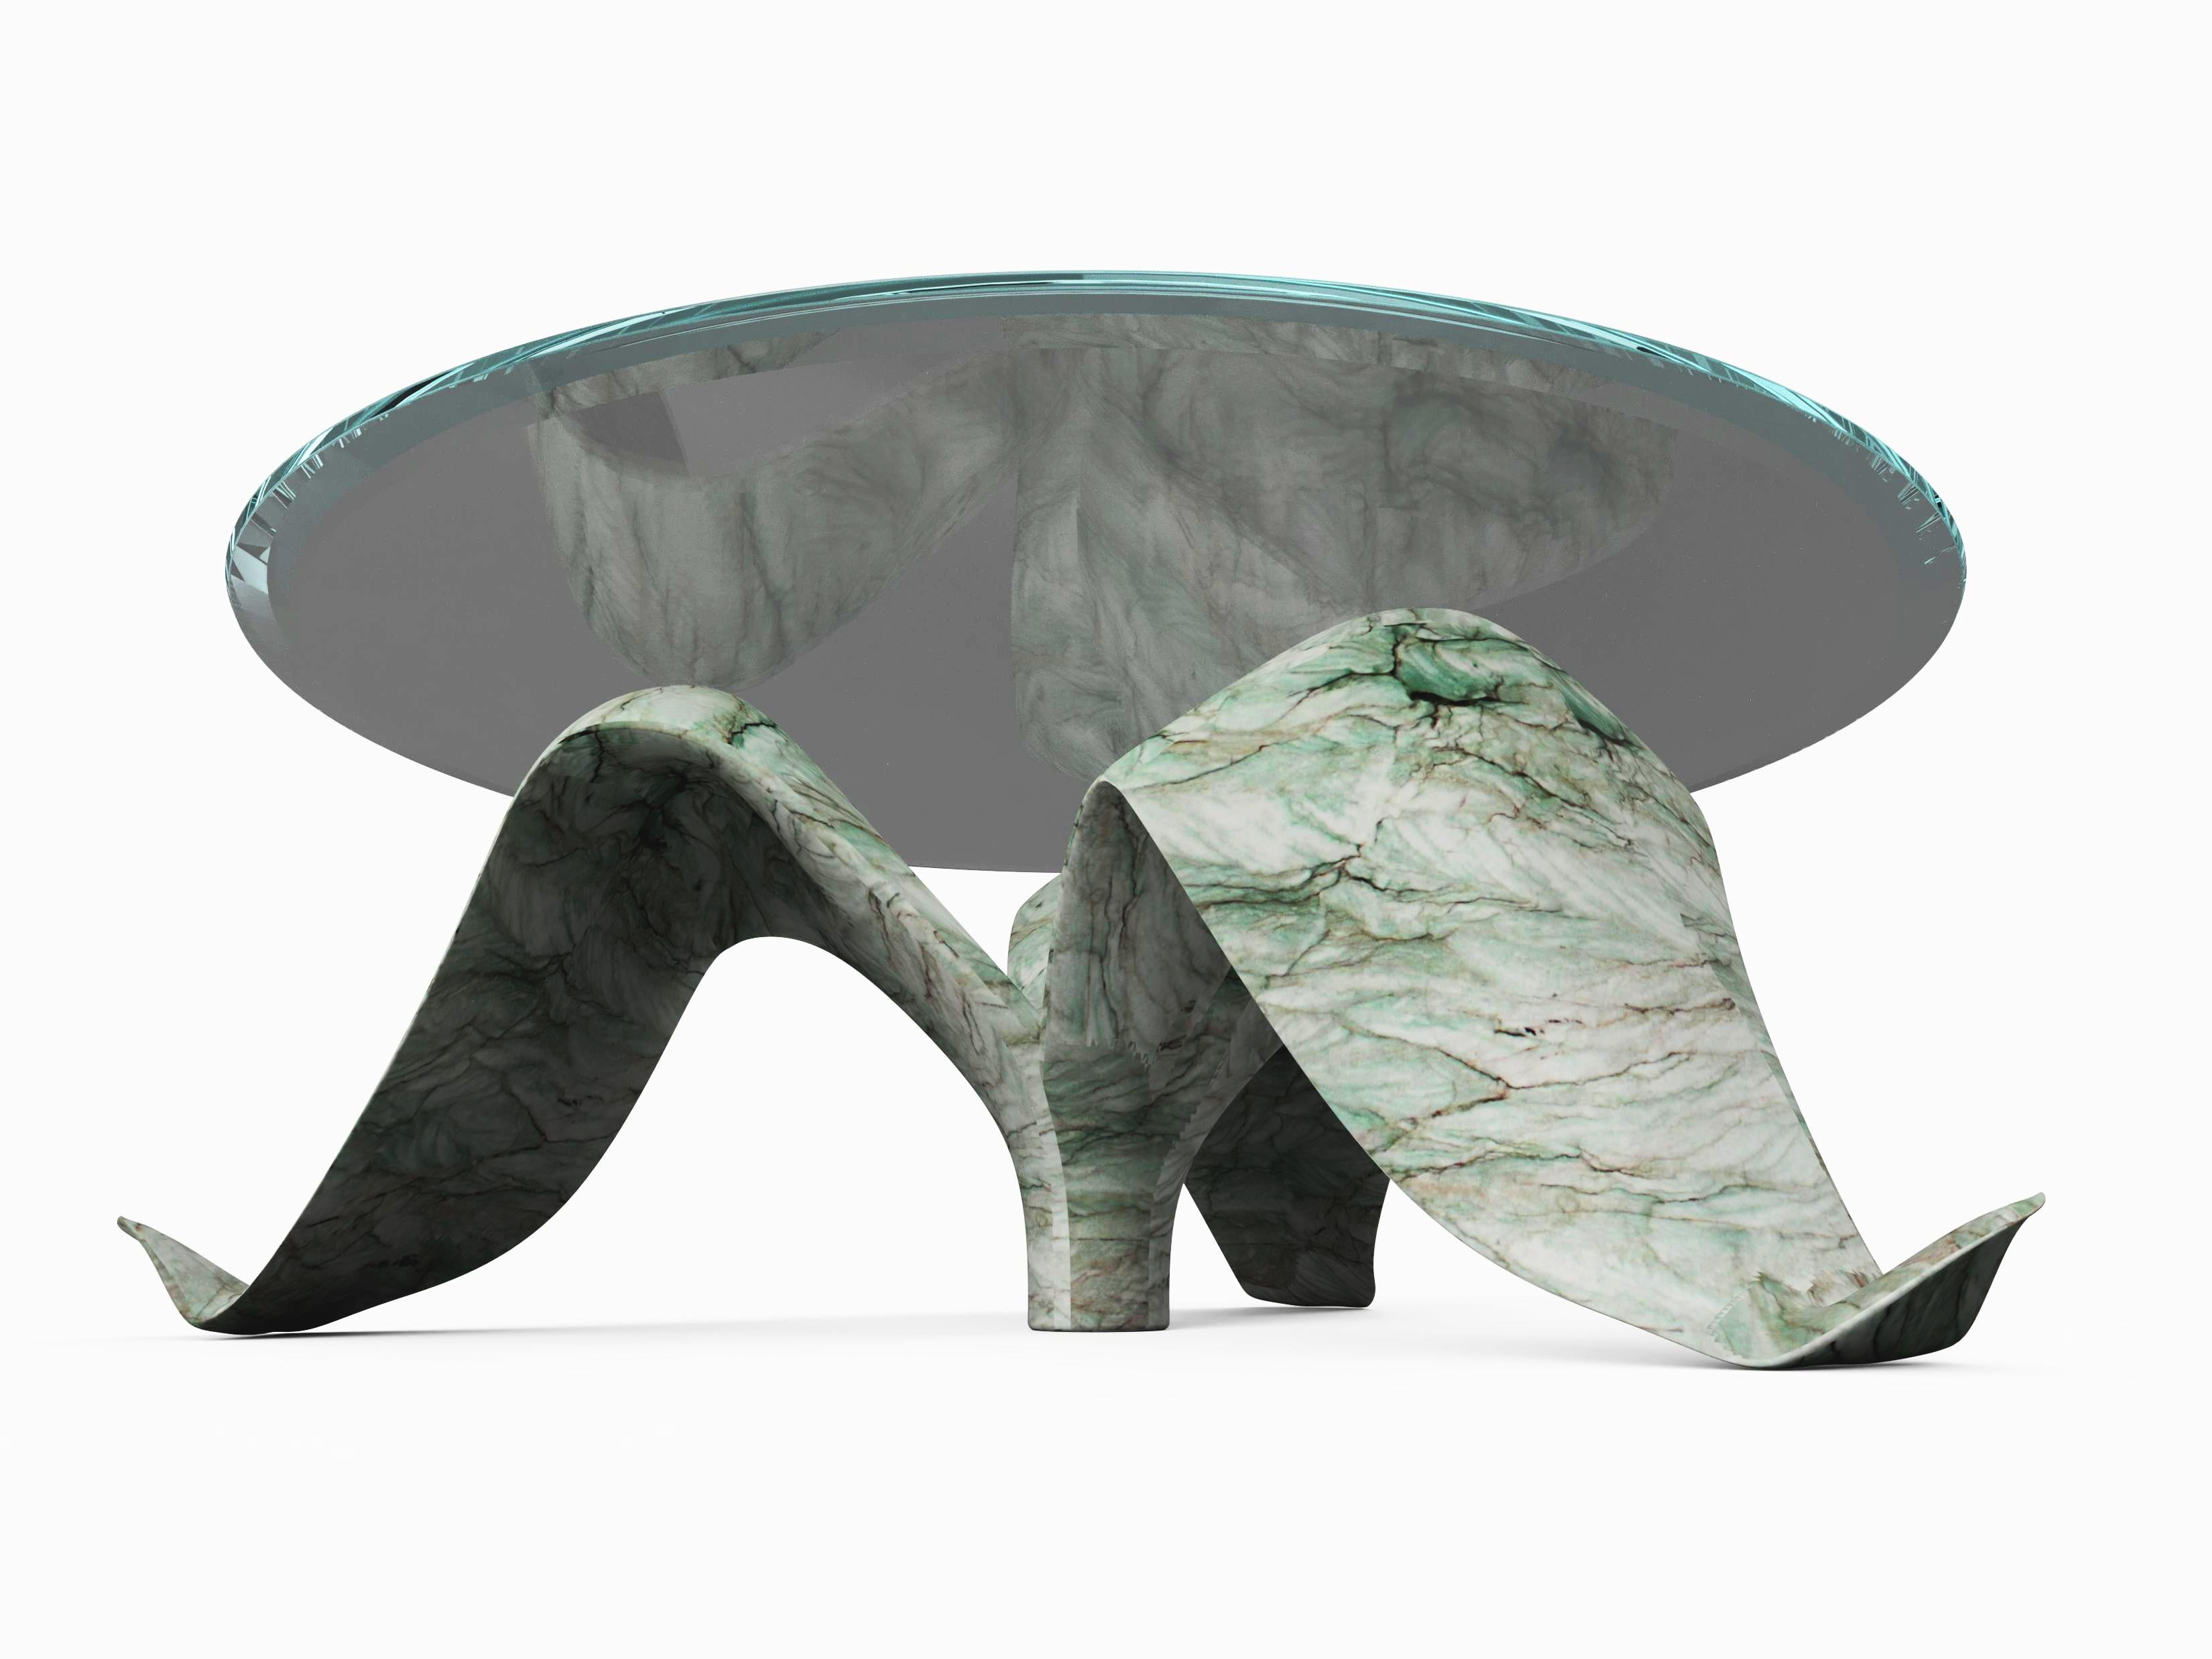 The Diamond Leaf coffee table, 1 of 1 by Grzegorz Majka
Edition 1 of 1
Dimensions: 51.18 x 51.18 x 18.11 in
Materials: Glass Top. Onyx base. 


The Diamond collection proves that everything is possible. It goes beyond the stereotypical